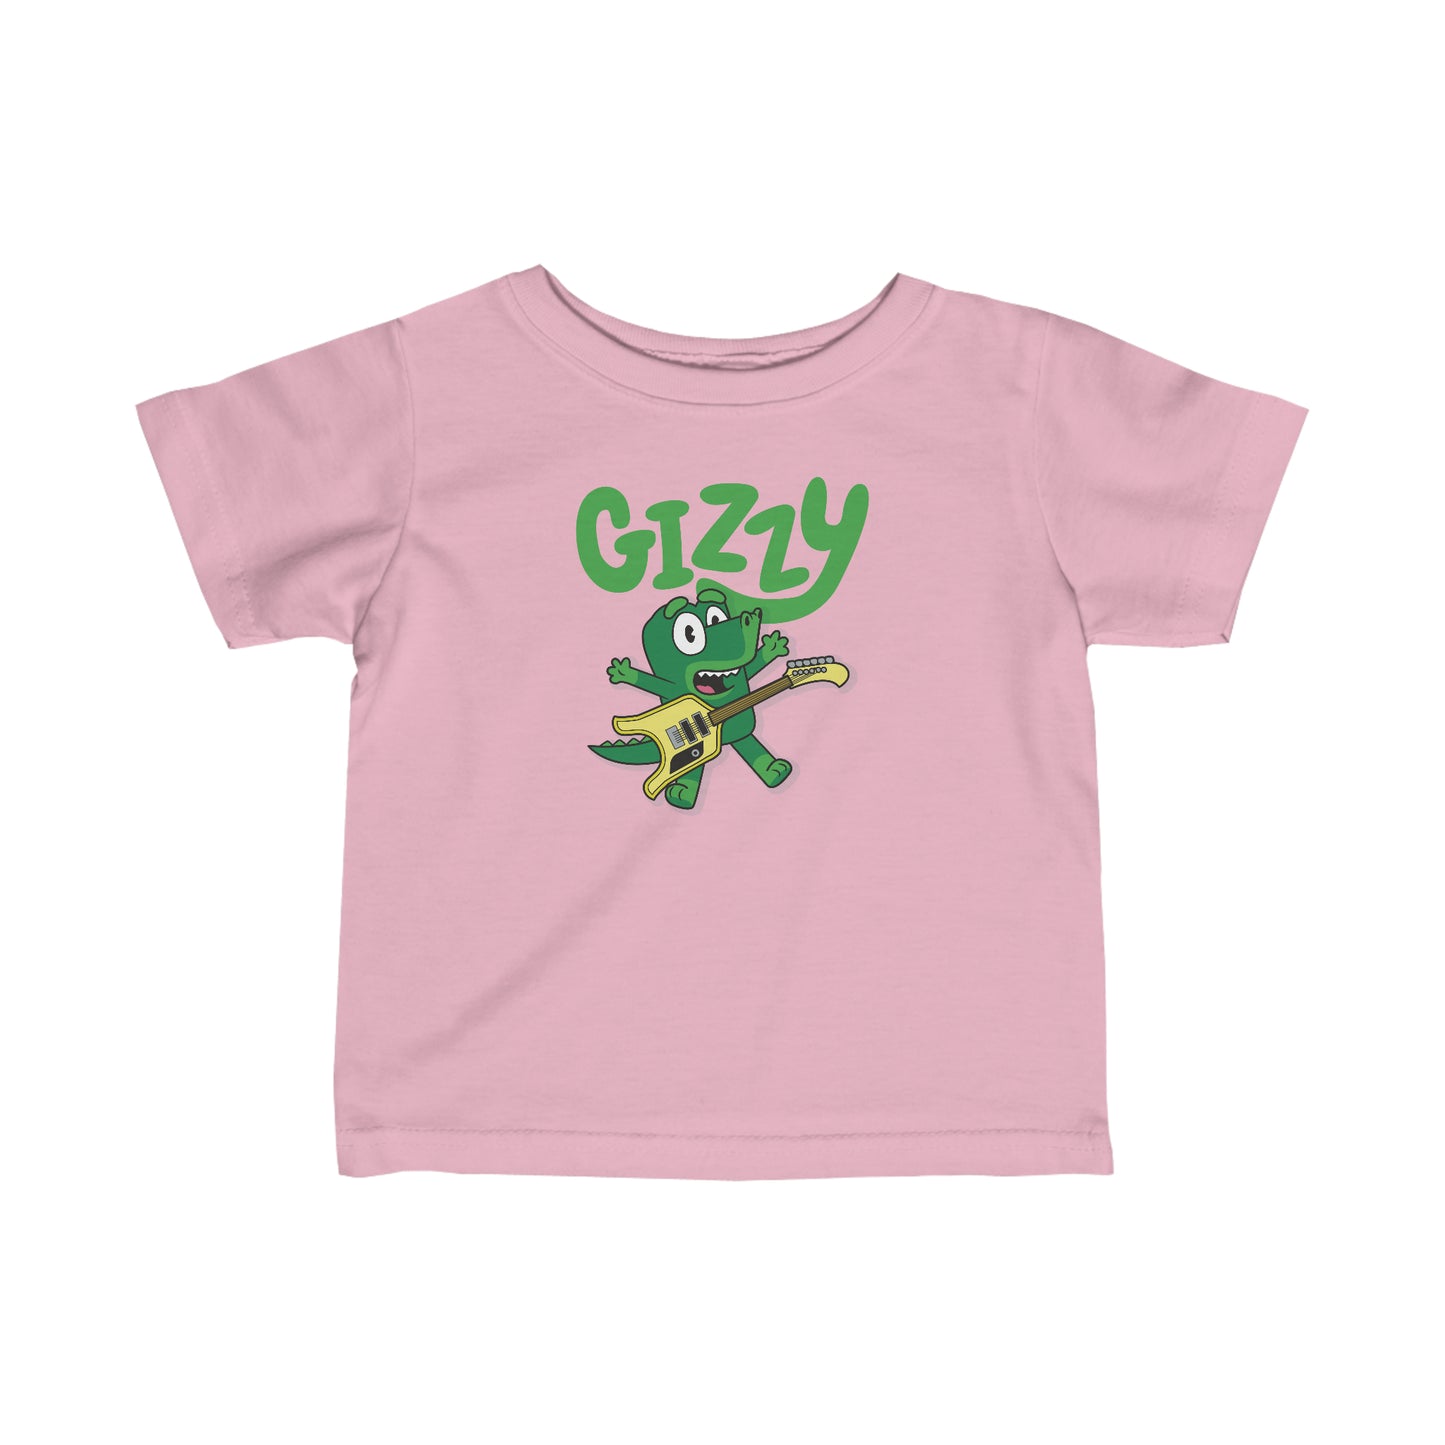 Gizzy Parody with Flying Microtonal Banana Guitar - Infant Toddler Fine Jersey Tee